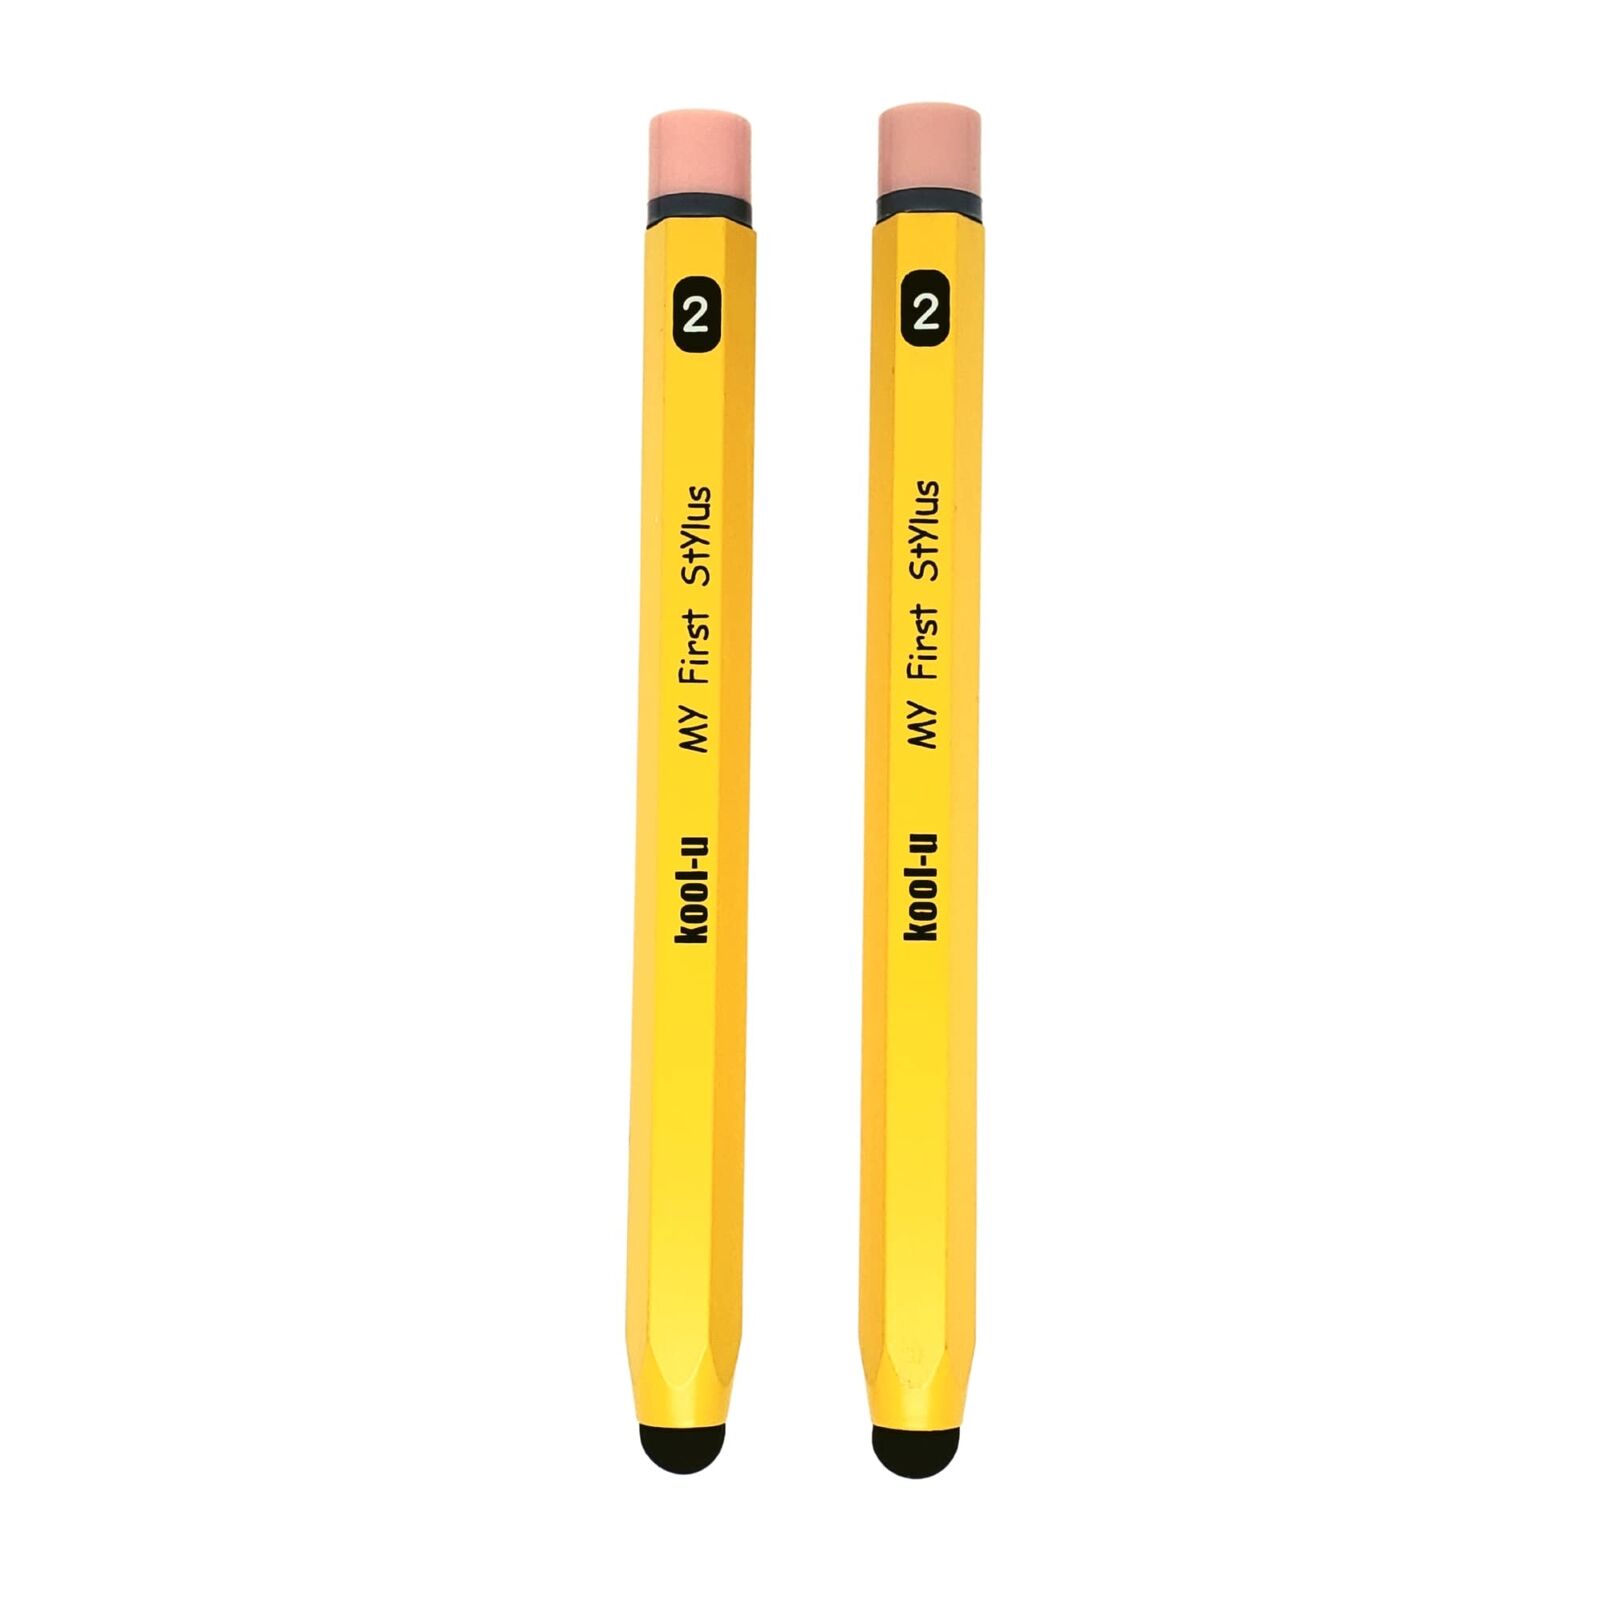 Stylus Pens for Kids, Hexagon Shaped Like a Real Pencil, Compatible with All ...